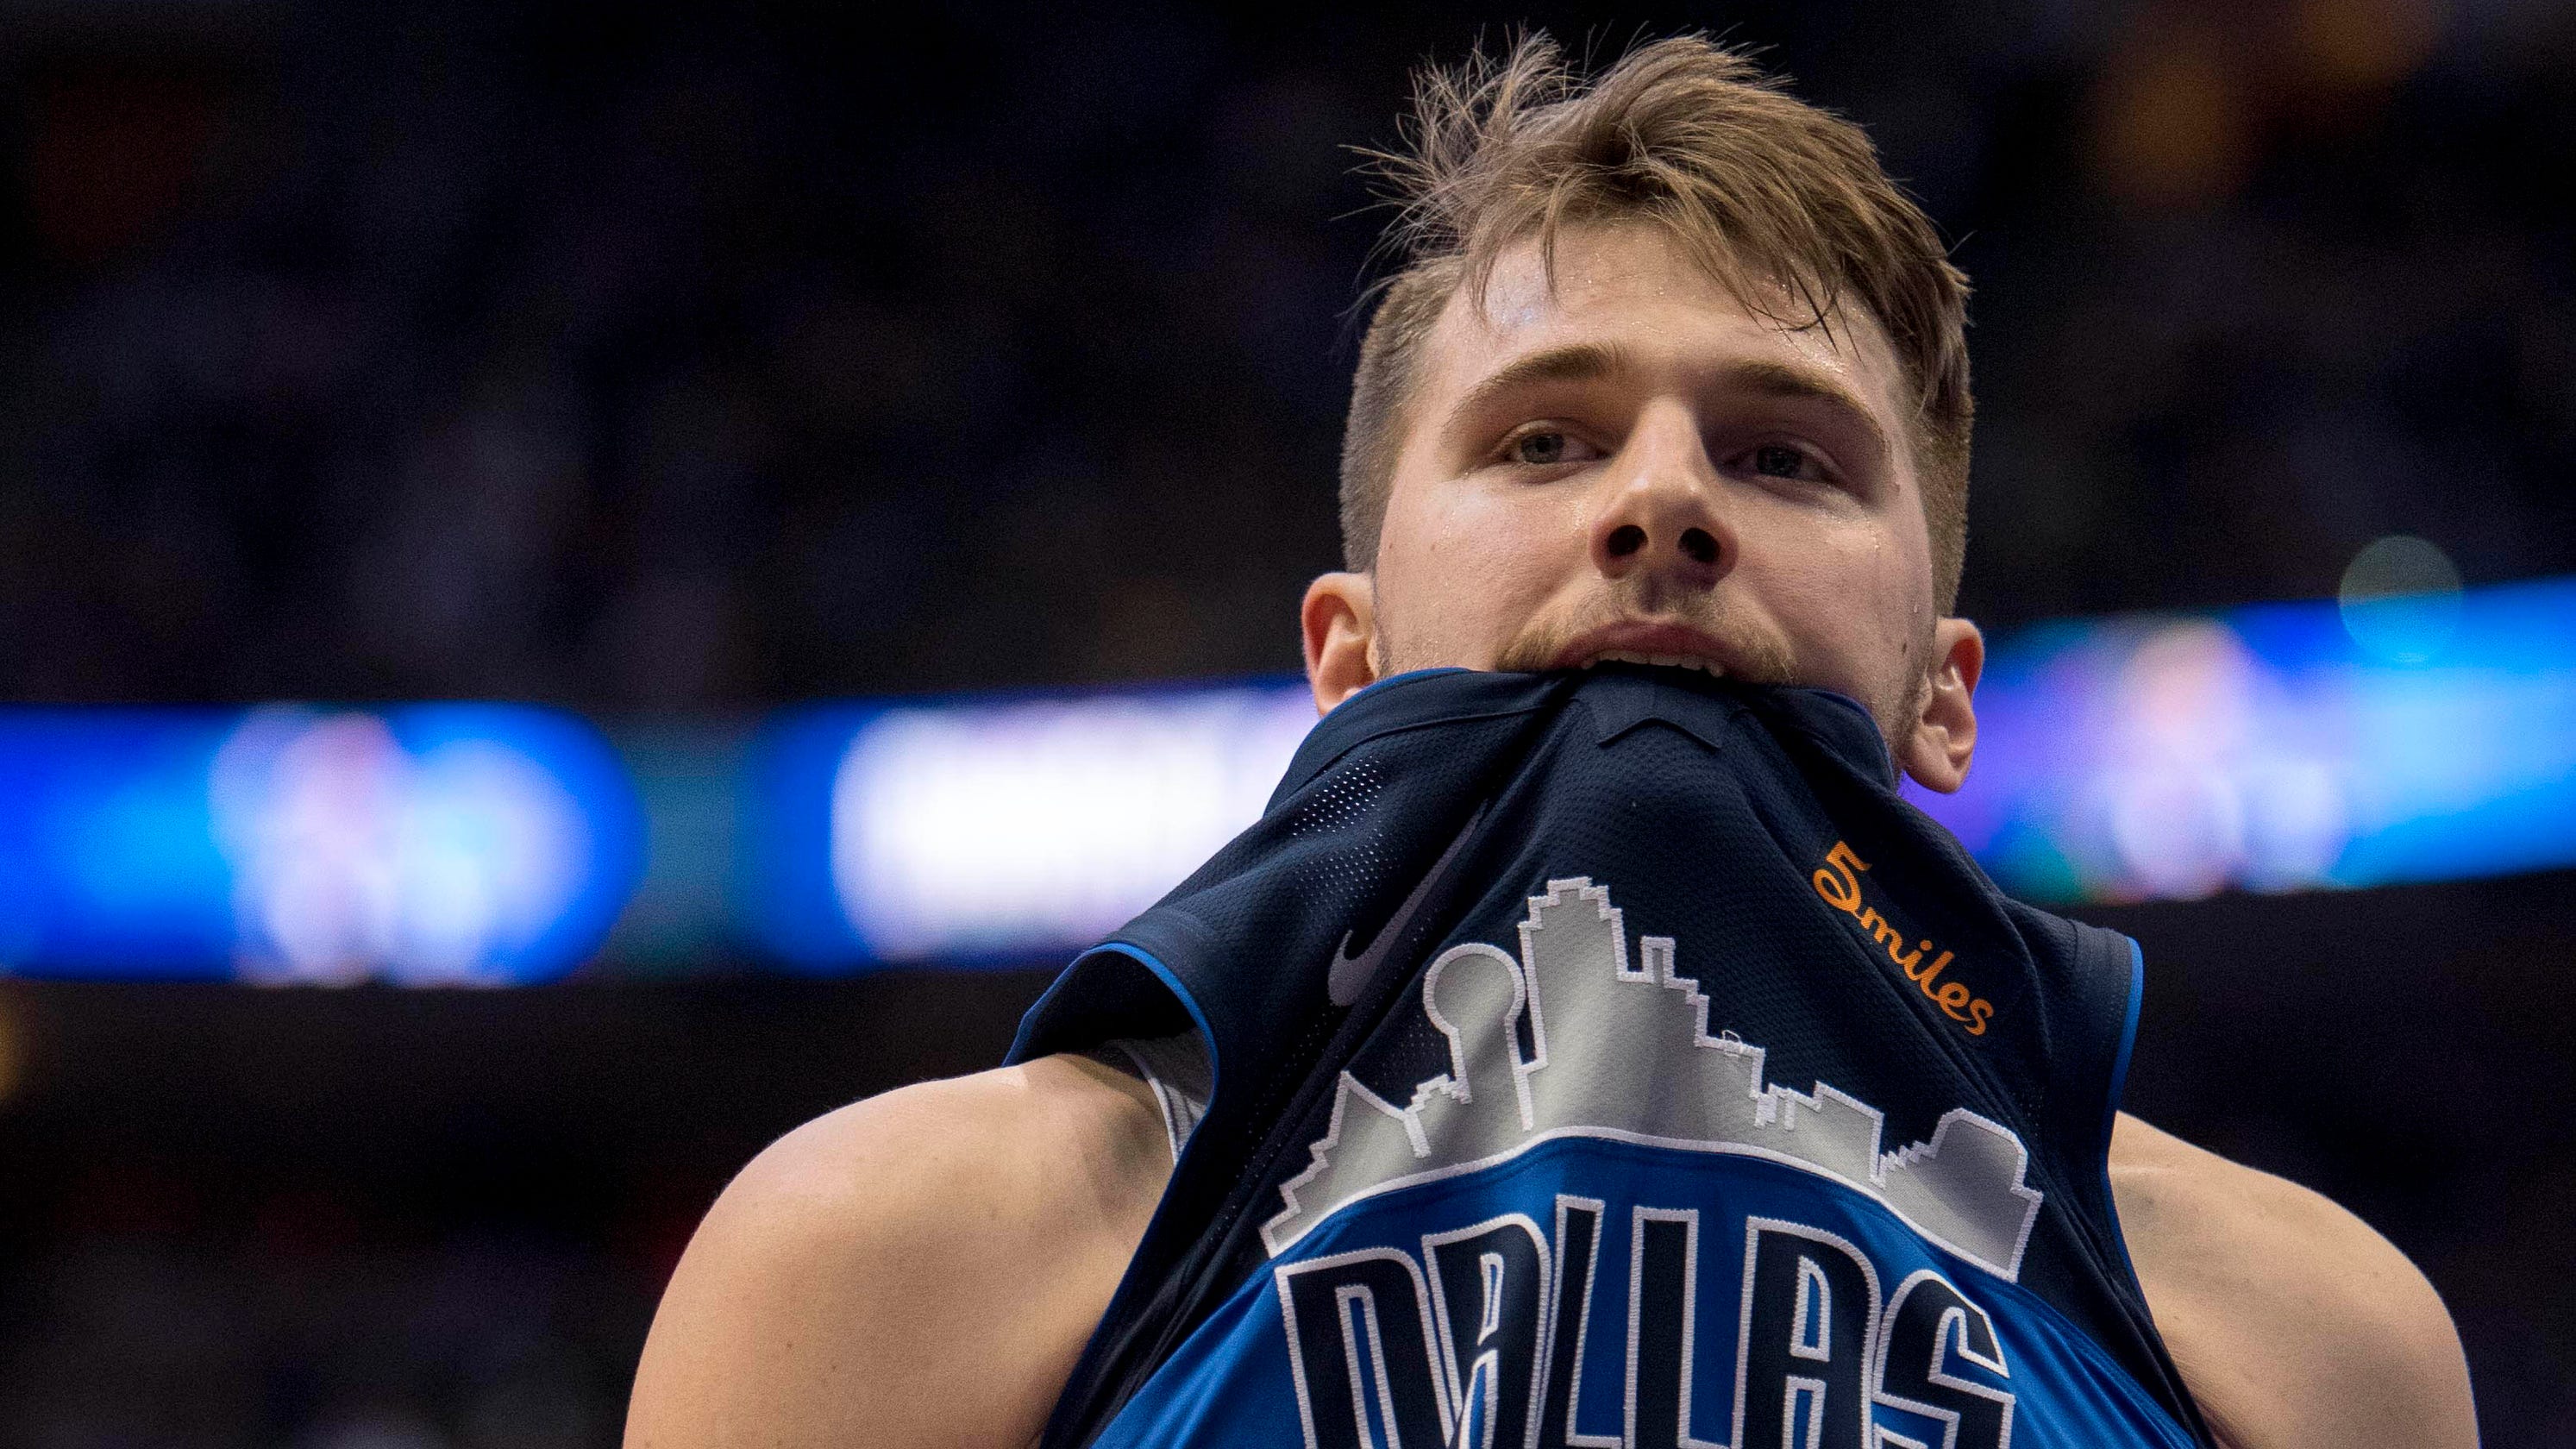 Luka Doncic Nbas Brightest New Star Is Most Glaring All Star Snub